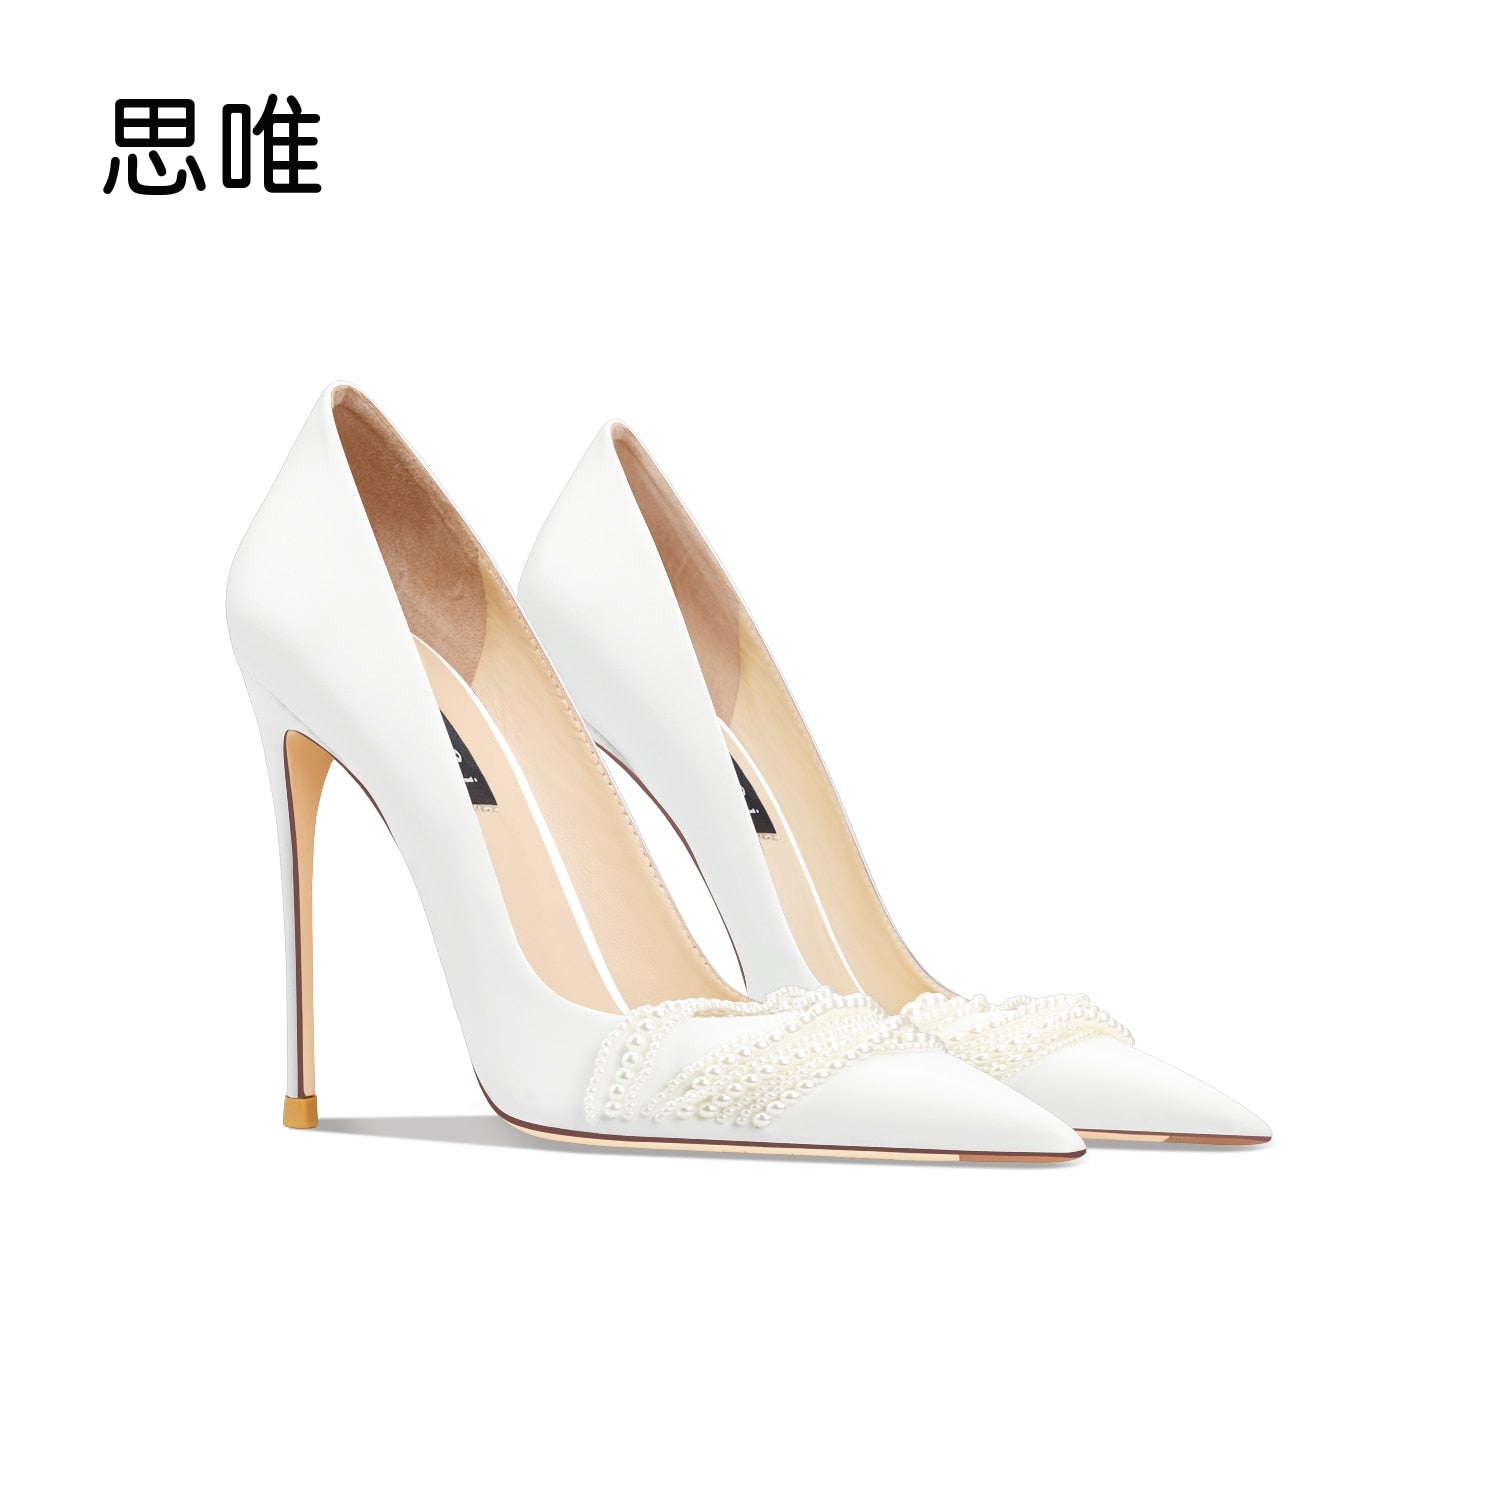 Dropship Dream Pairs Pump Shoe Women's Heels Pumps Strappy Buckle Slingback  Dress Wedding Party Shoes Thin Heels PU Pointed Toe Heel Shoe to Sell  Online at a Lower Price | Doba